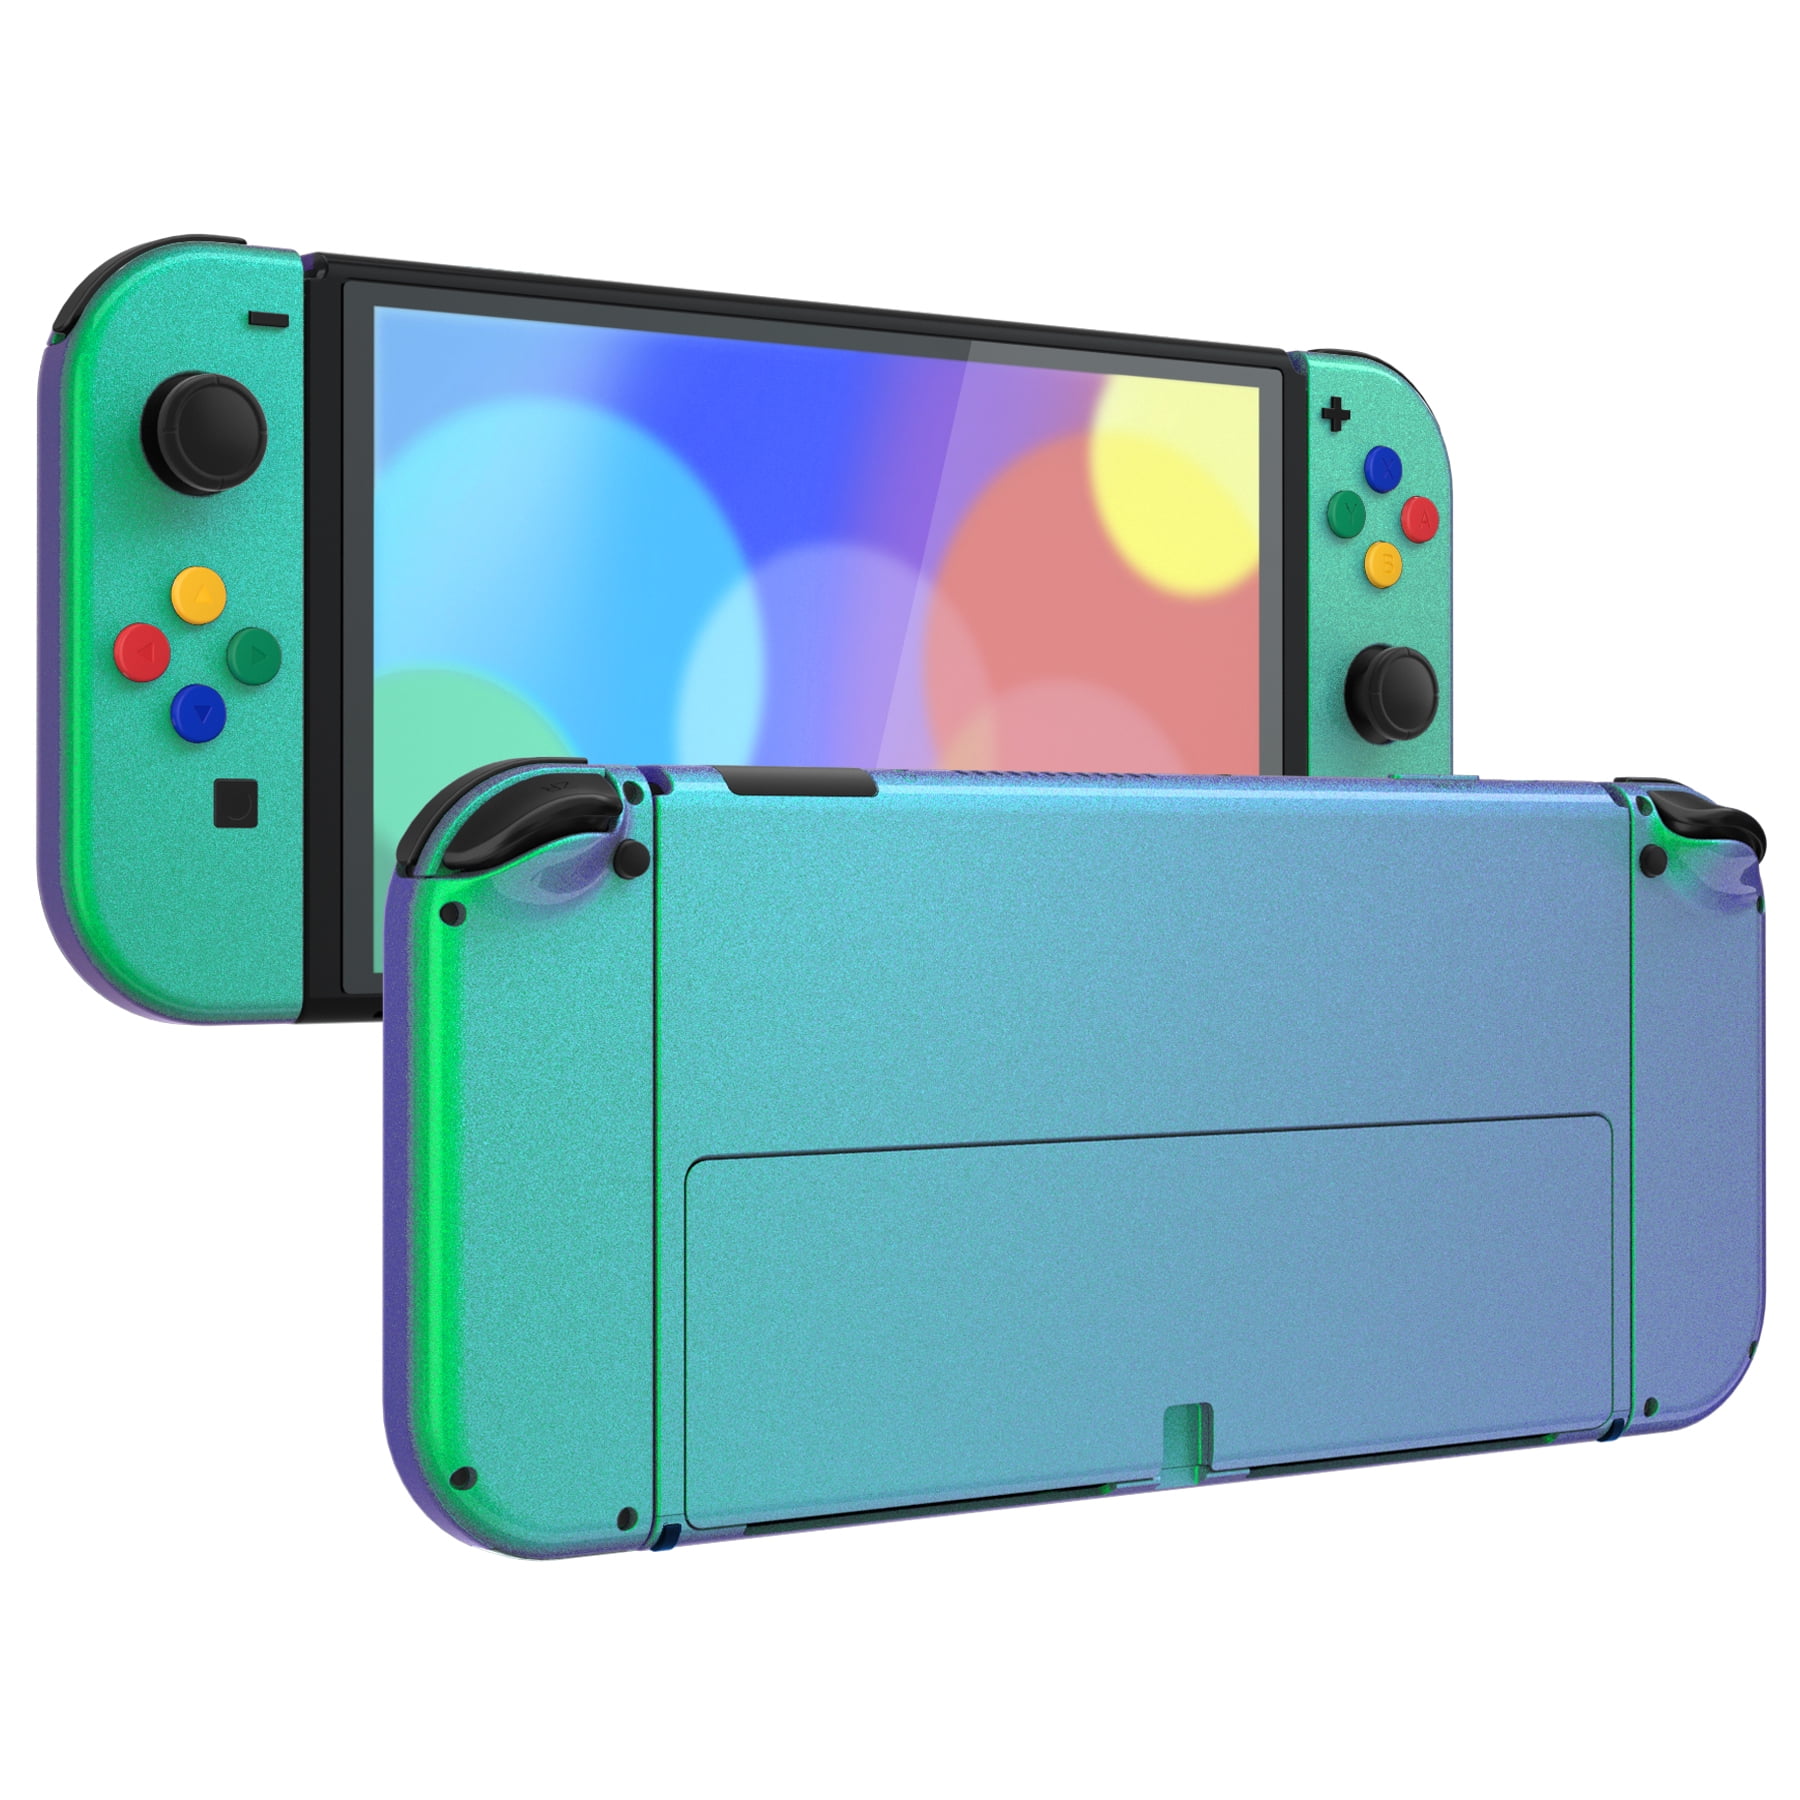 Nintendo Switch Shell and Joy Con Case Covers by GameTech, $10.99, Best  Retro Gaming Deals